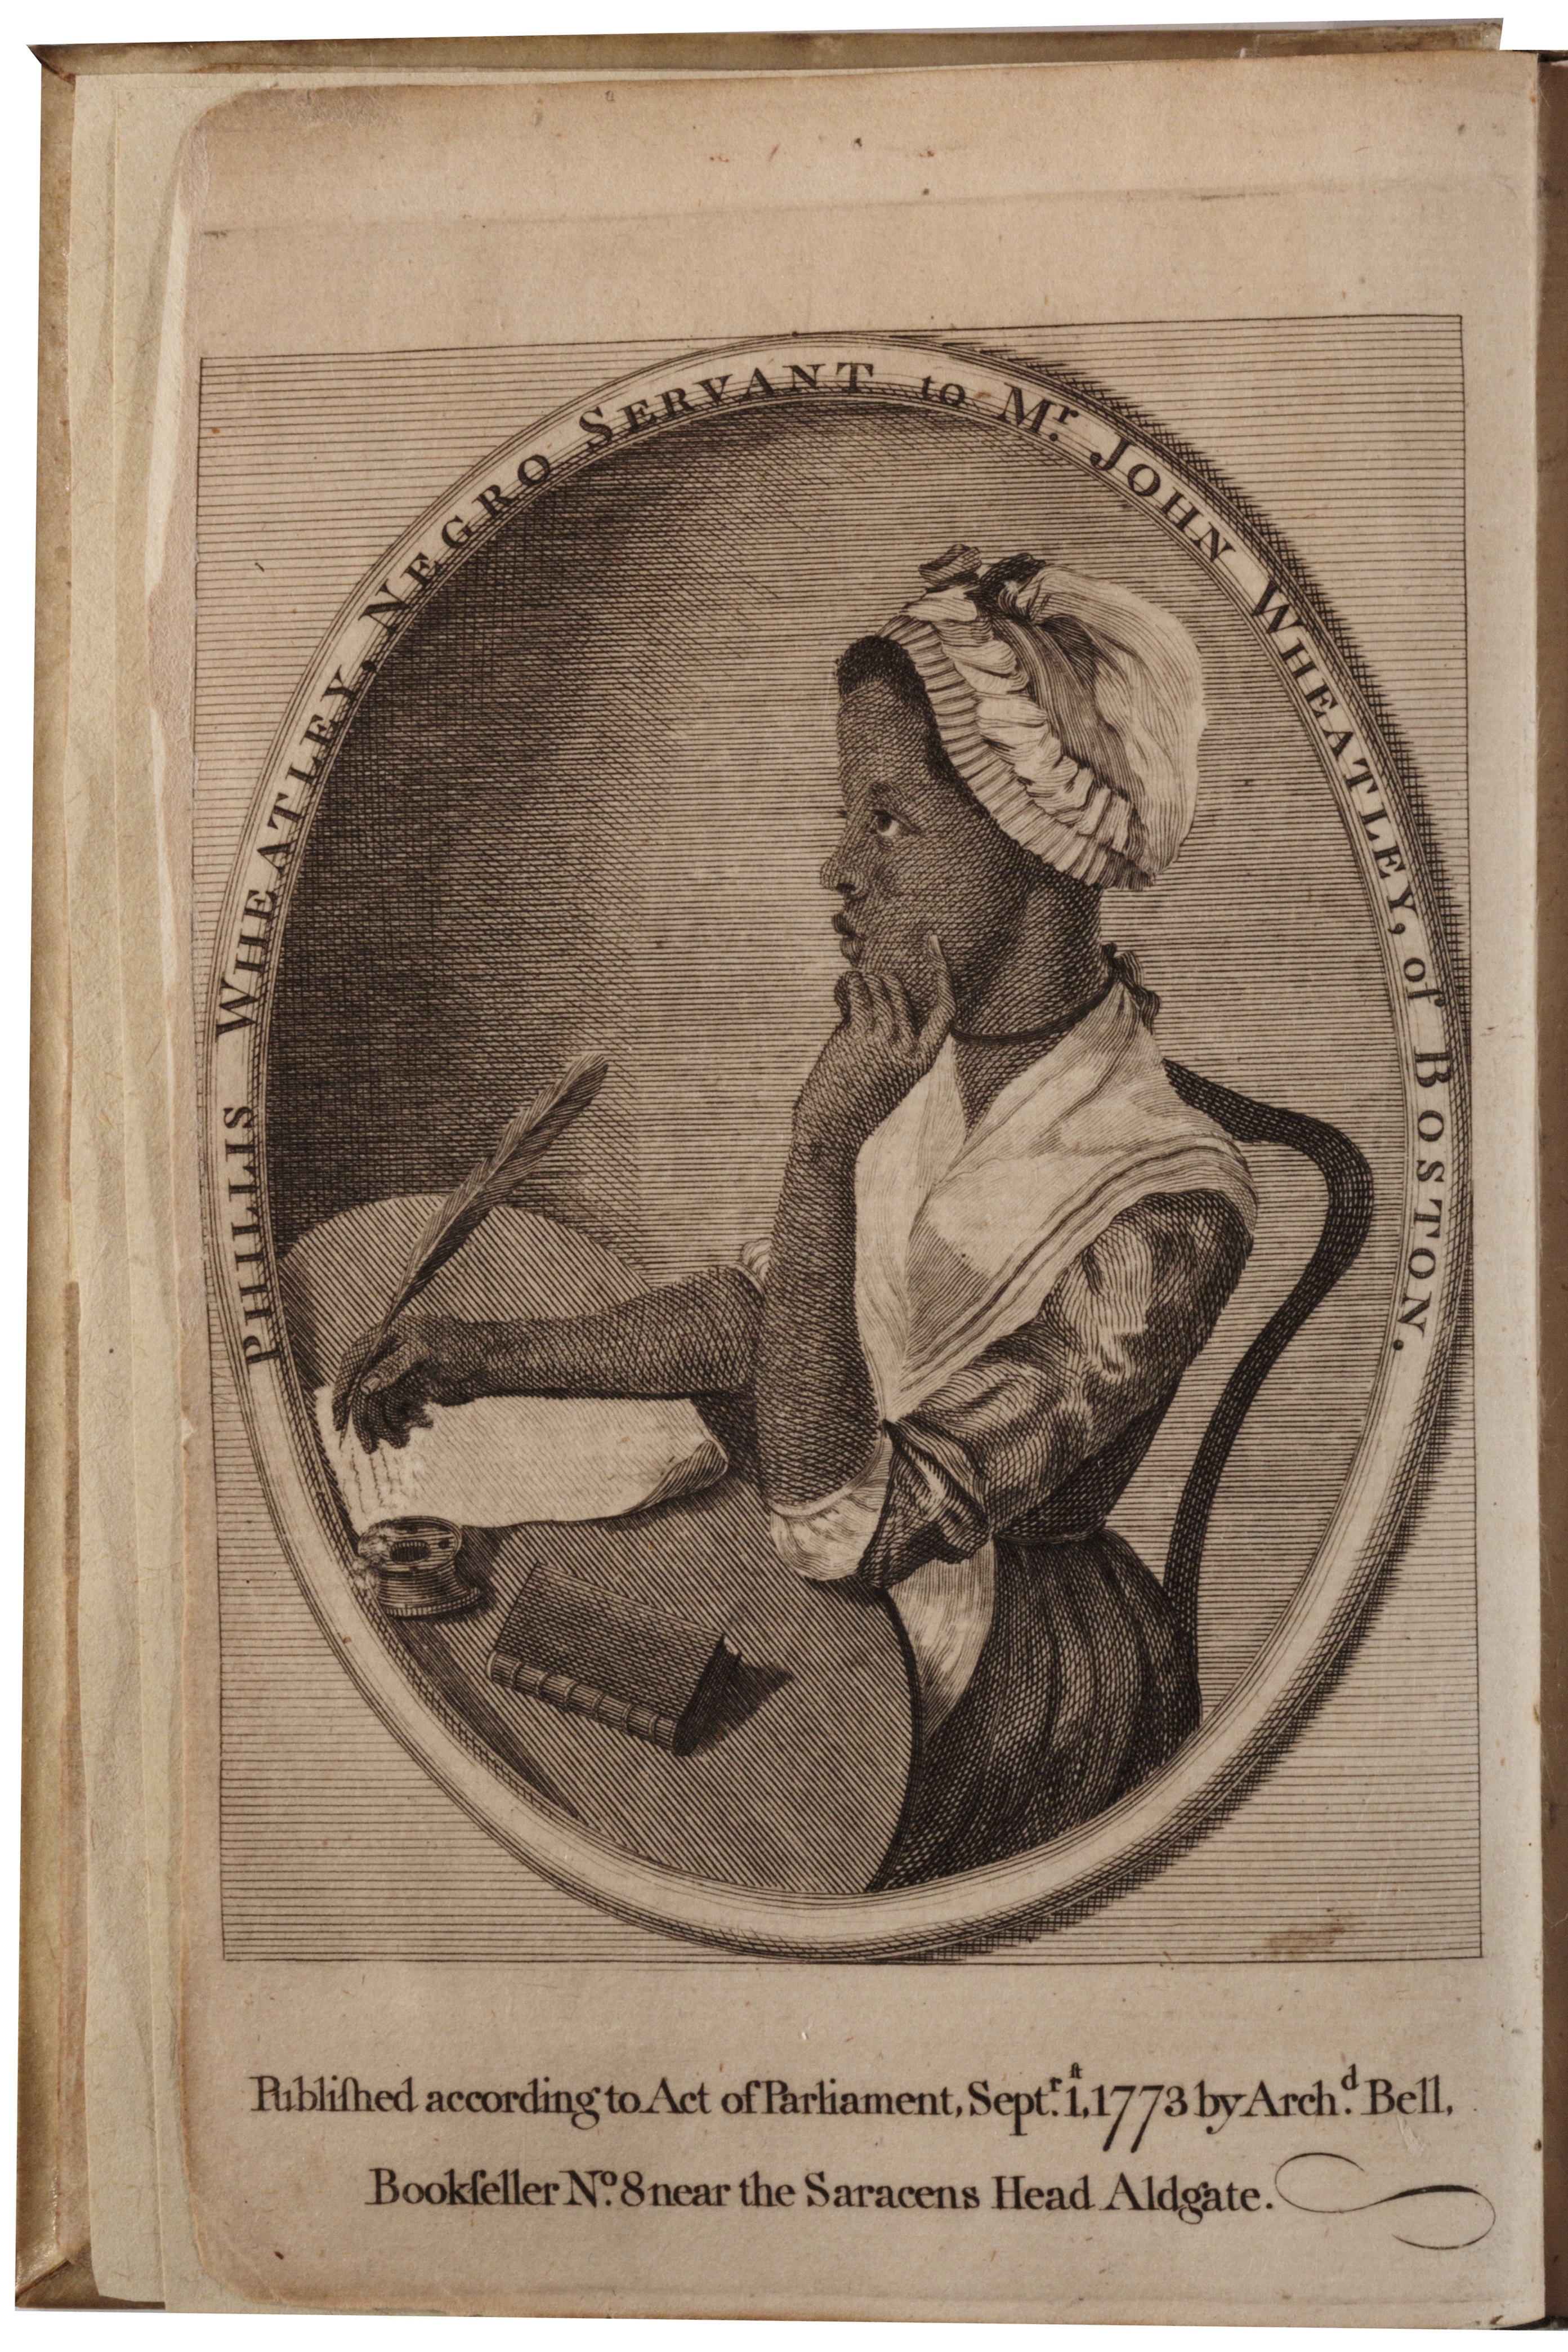 Print of Phillis Wheatley featured in her book of poems, 1773. Wheatley was a well-known poet during the time of the American Revolution, despite the fact that she had been enslaved. (The Gilder Lehrman Institute, GLC06154)